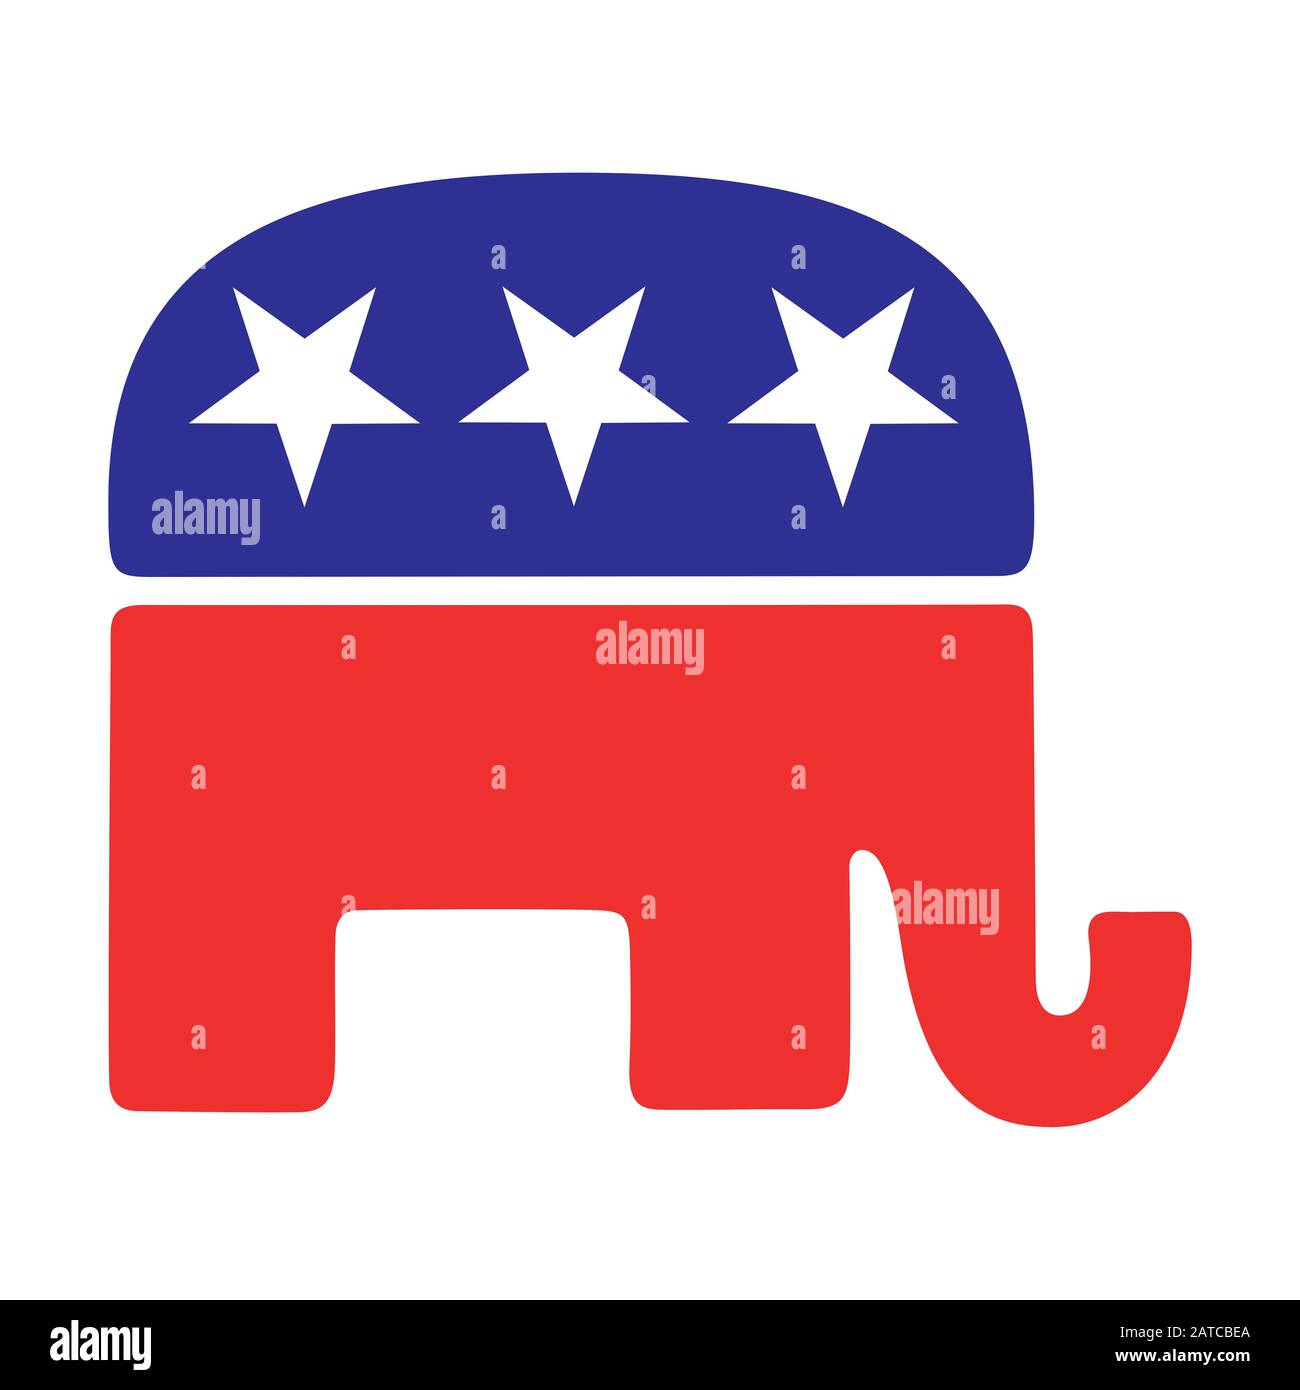 US republican party sign illustration Stock Photo